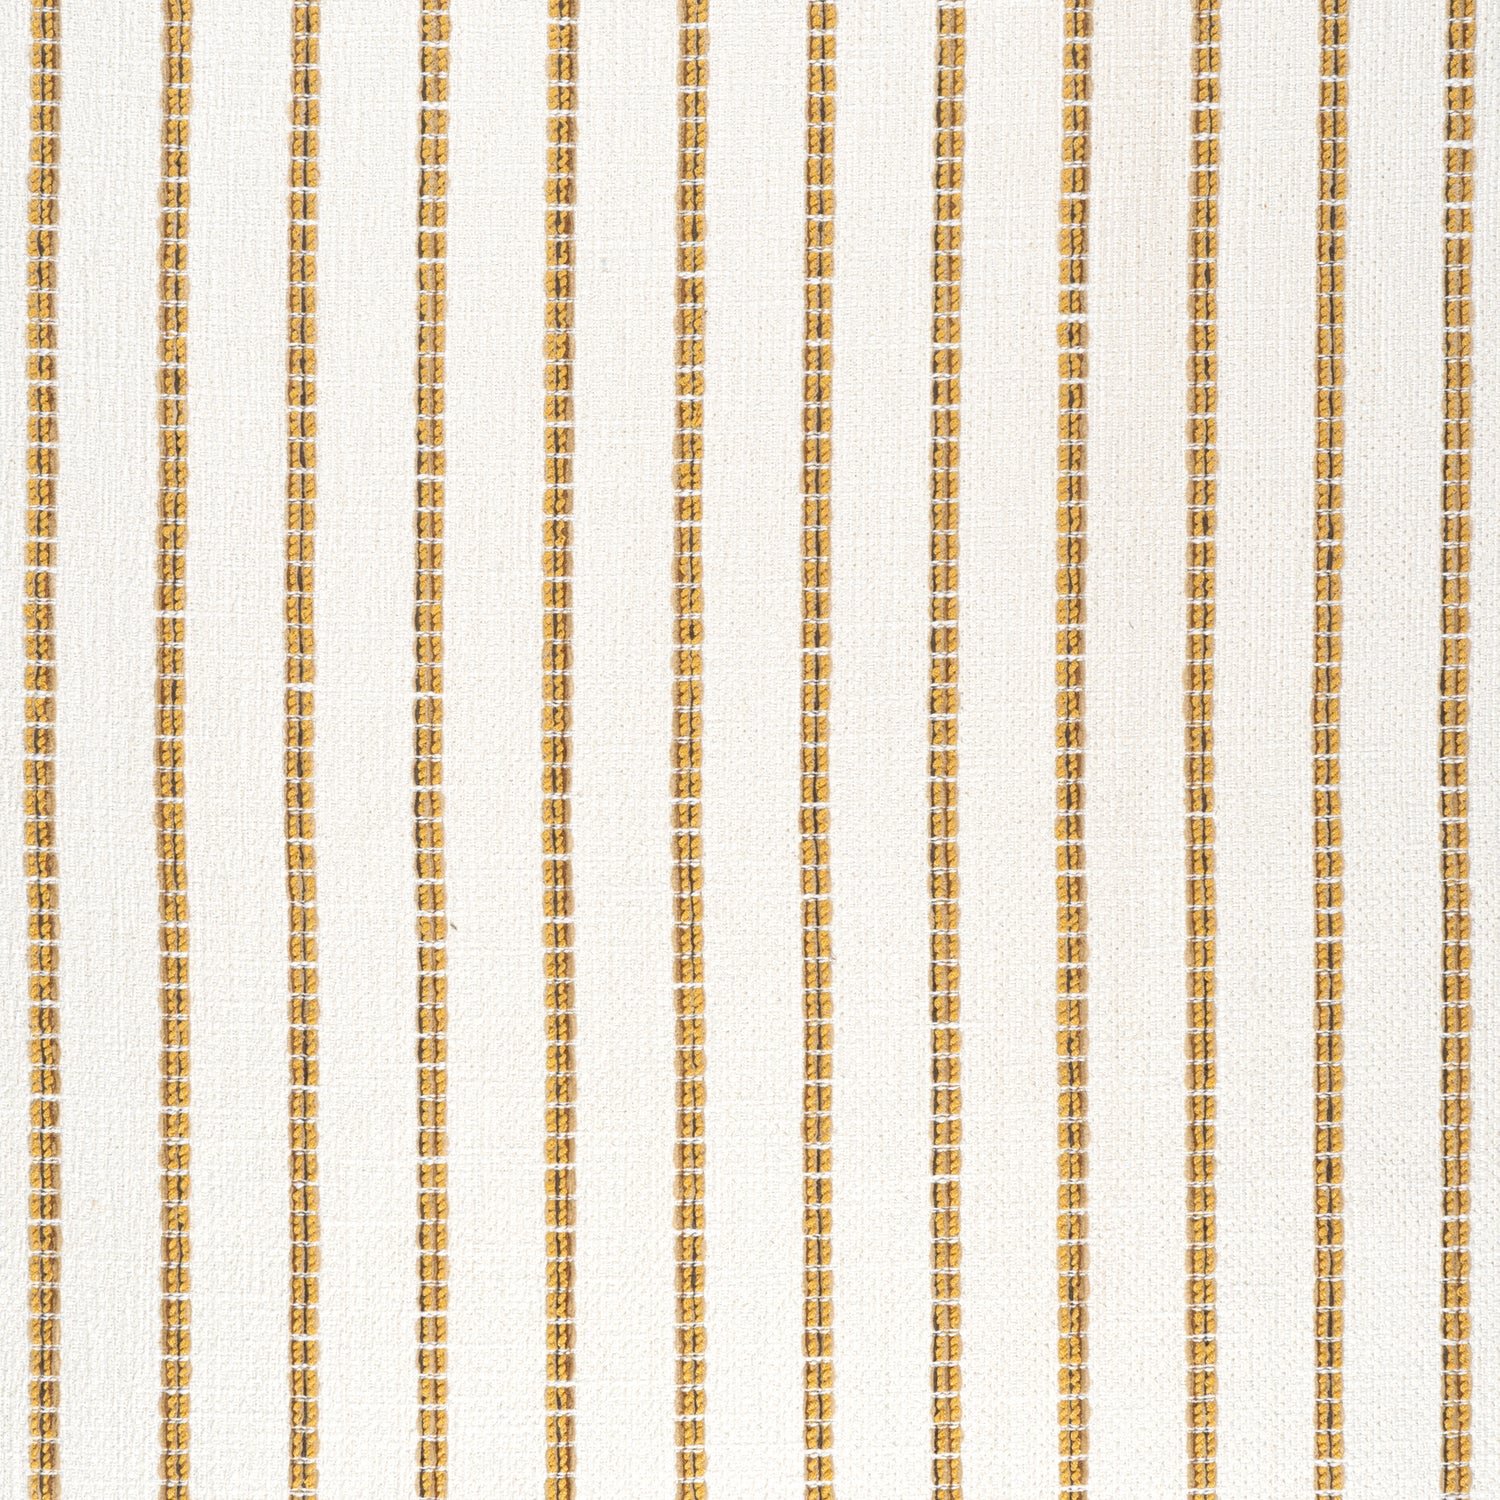 Oak Creek Stripe fabric in straw color - pattern number W78340 - by Thibaut in the  Sierra collection